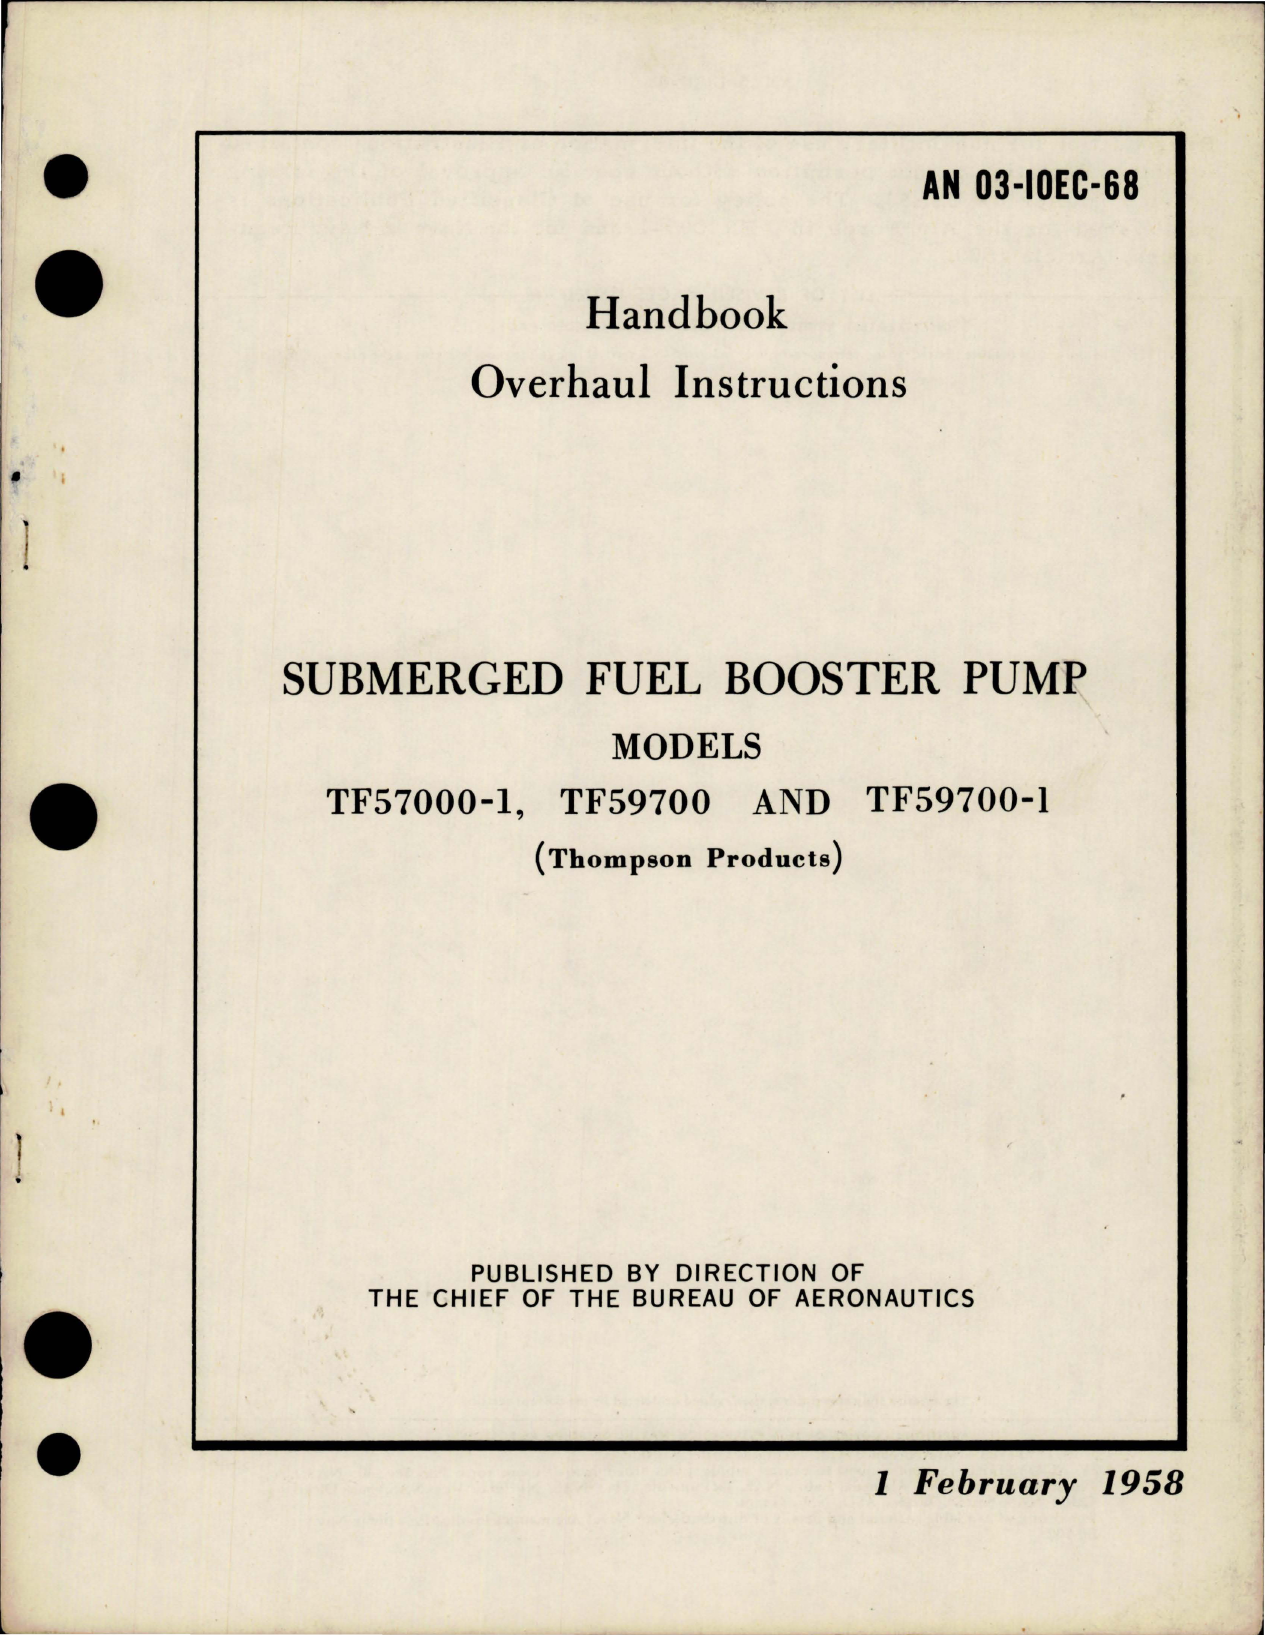 Sample page 1 from AirCorps Library document: Overhaul Instructions for Submerged Fuel Booster Pump - Models TF57000-1, TF59700 and TF59700-1 